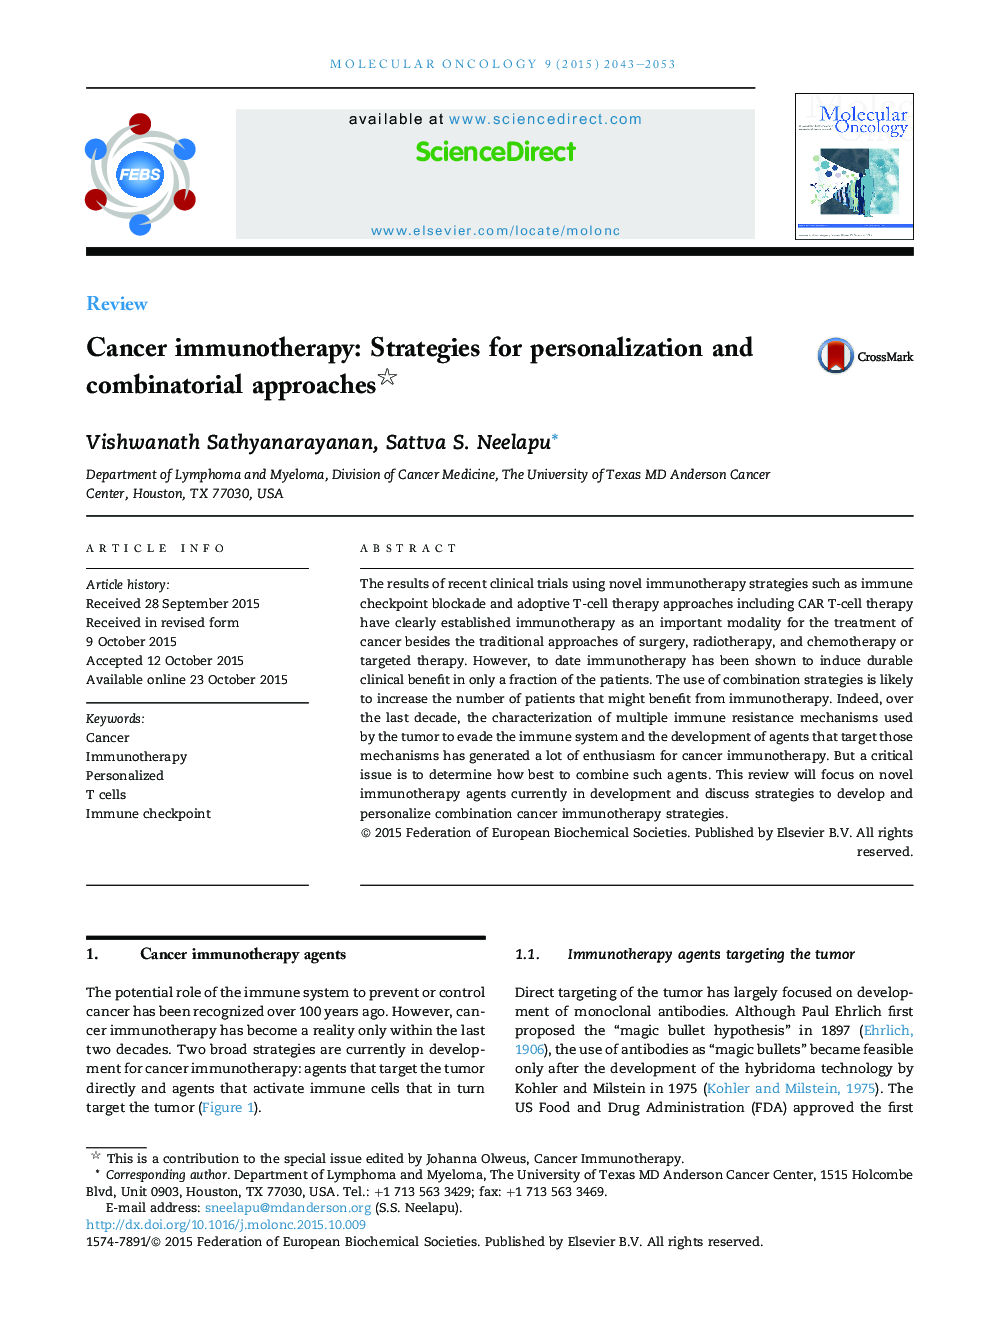 Cancer immunotherapy: Strategies for personalization and combinatorial approaches 